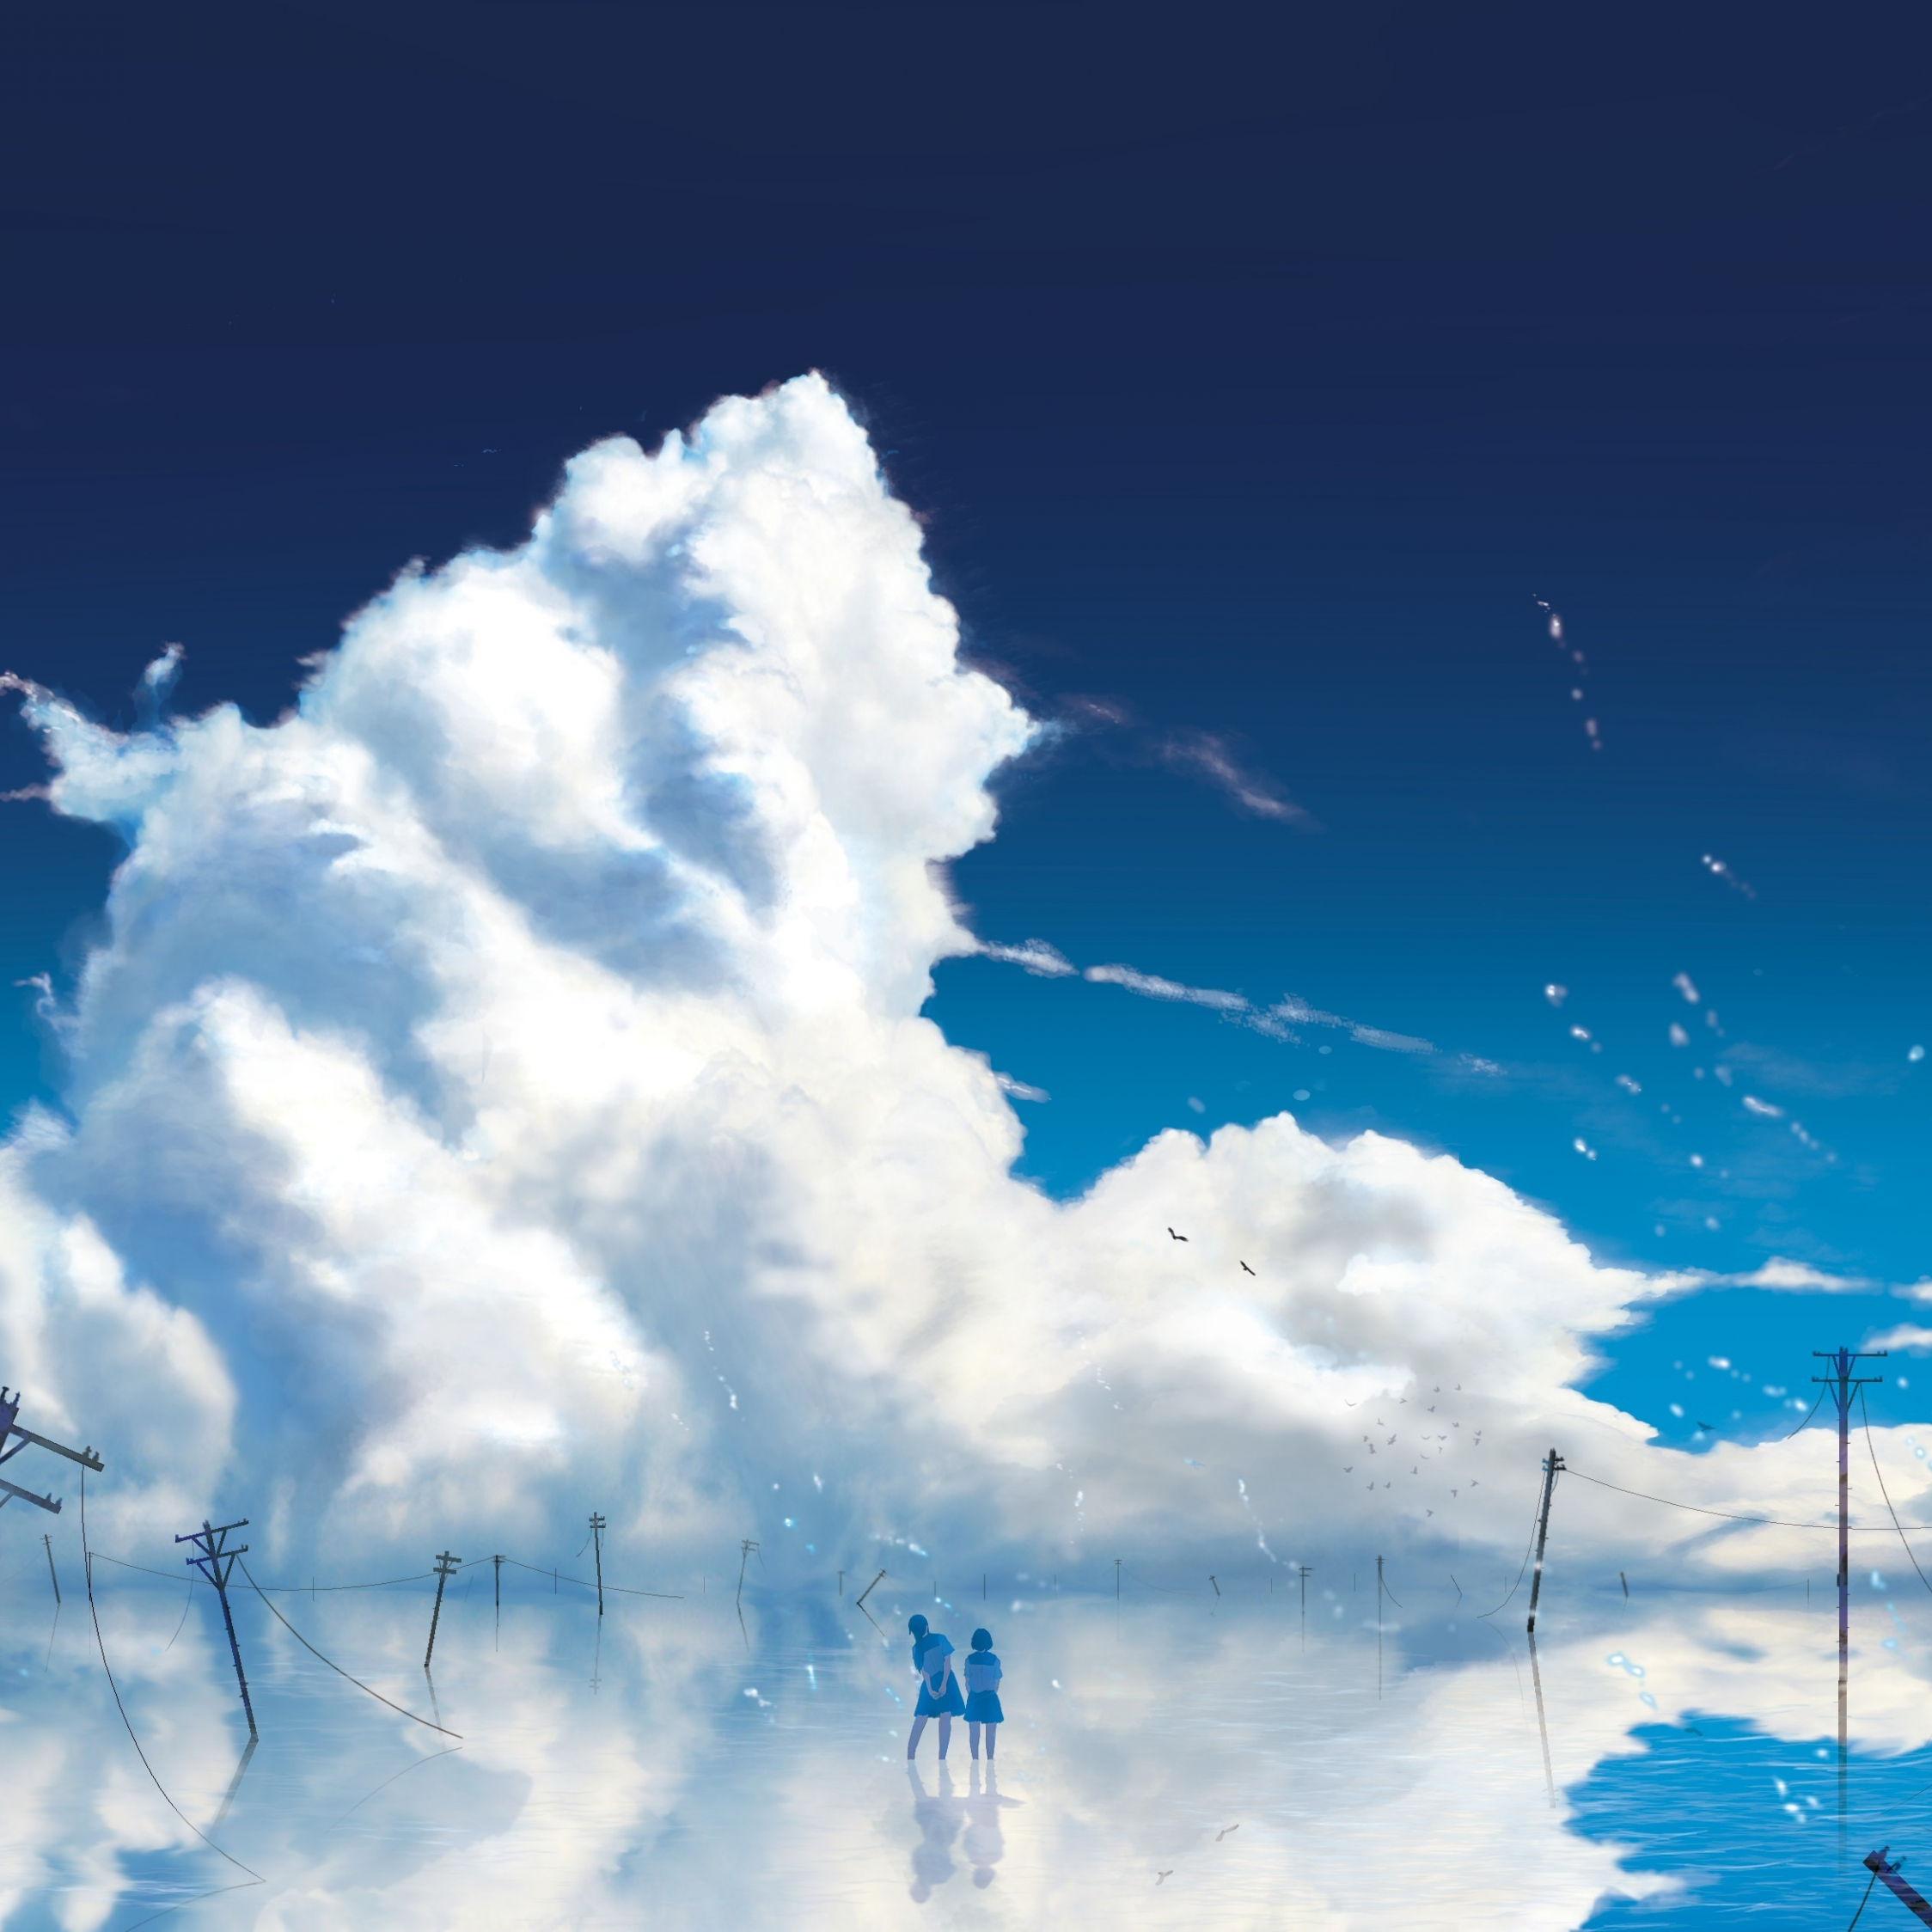 Download Anime Girls Outdoor Clouds 2248x2248 Wallpaper Ipad Air Ipad Air 2 Ipad 3 Ipad 4 Ipad Mini 2 Ipad Mini 3 2248x2248 Hd Image Background 15